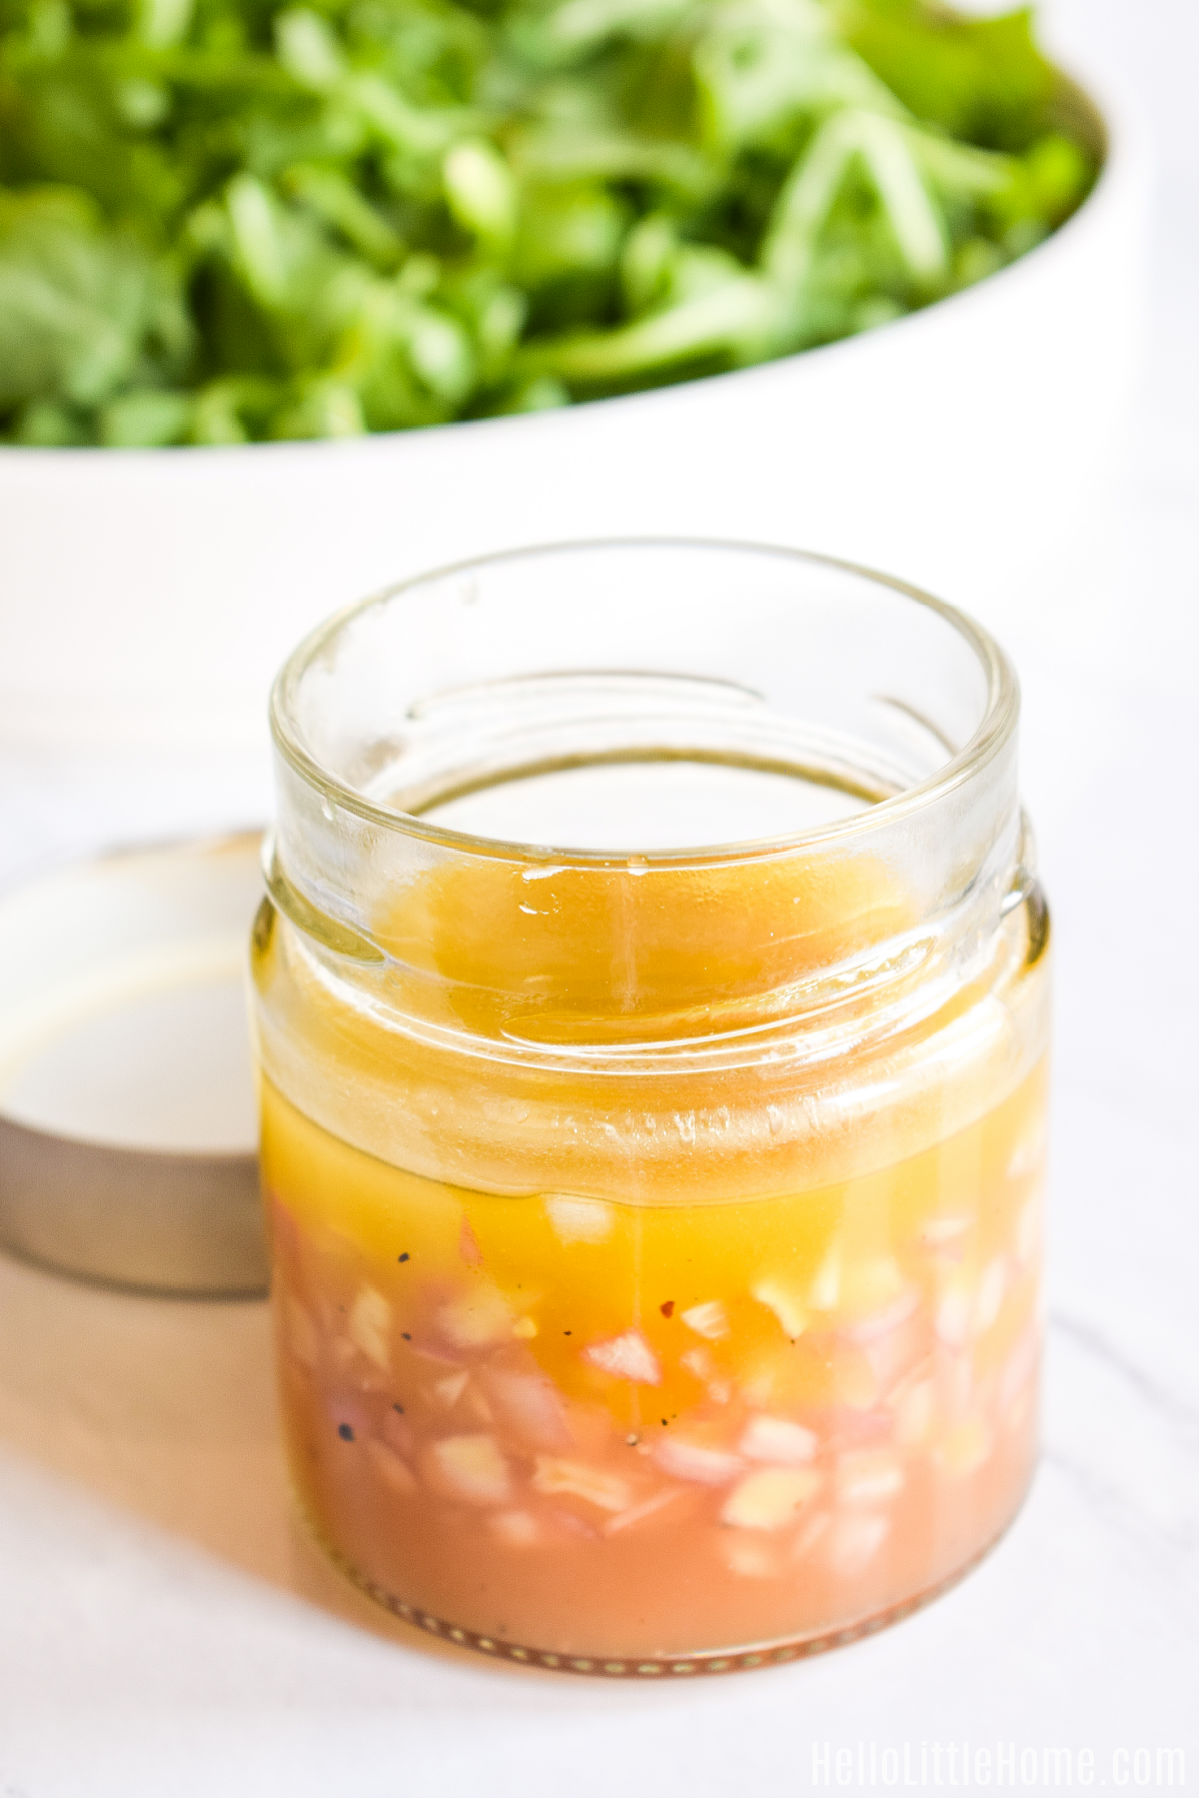 A jar of the finished vinaigrette next to a bowl of lettuce.